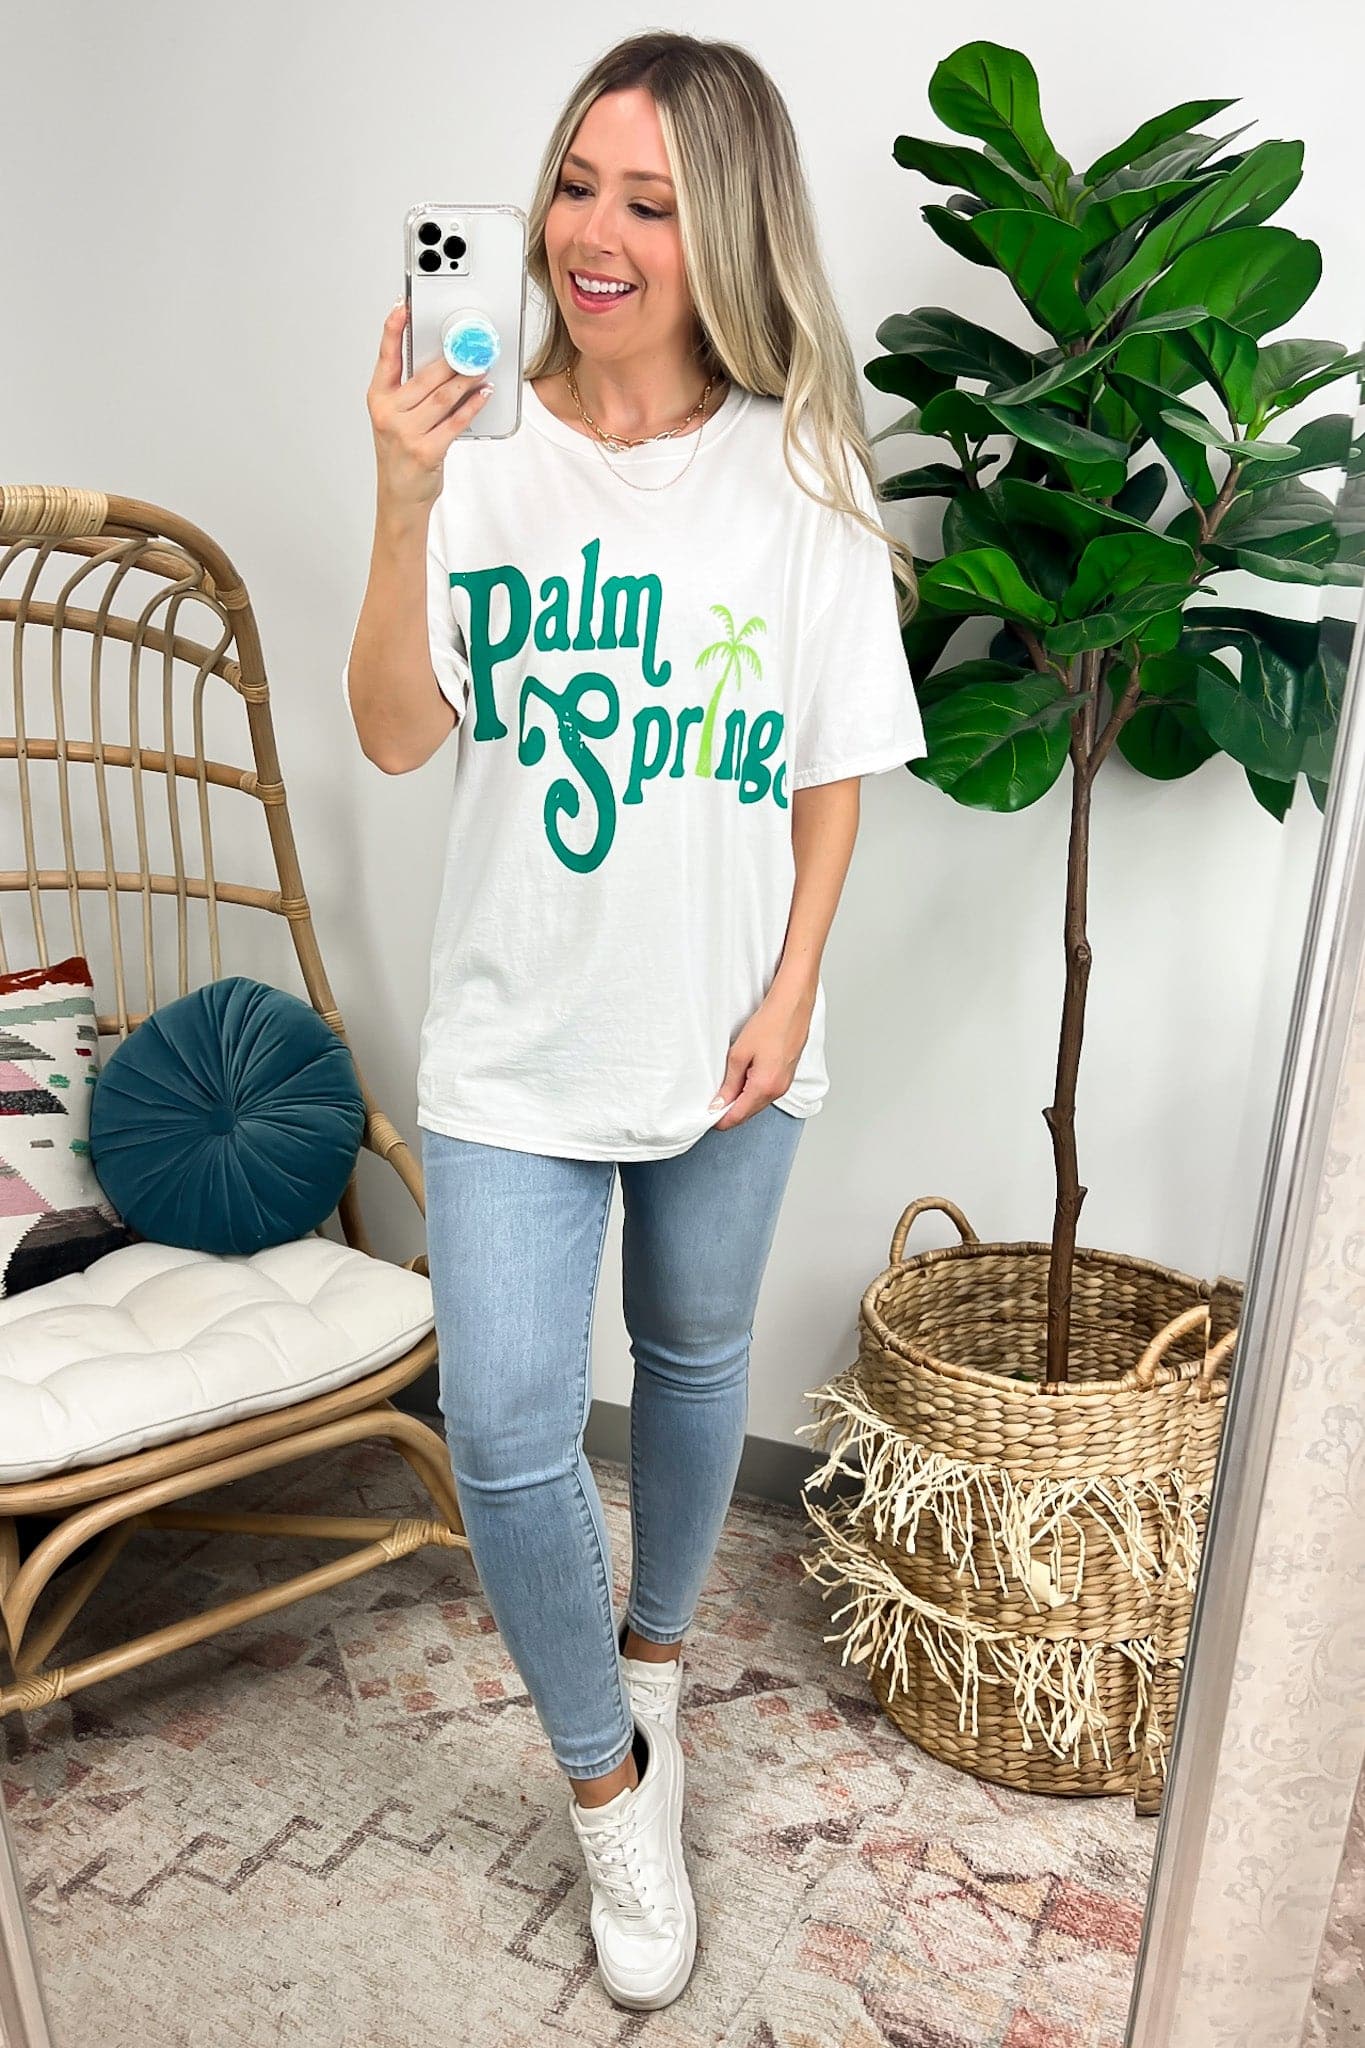  Palm Springs Oversized Vintage Graphic Tee - FINAL SALE - Madison and Mallory